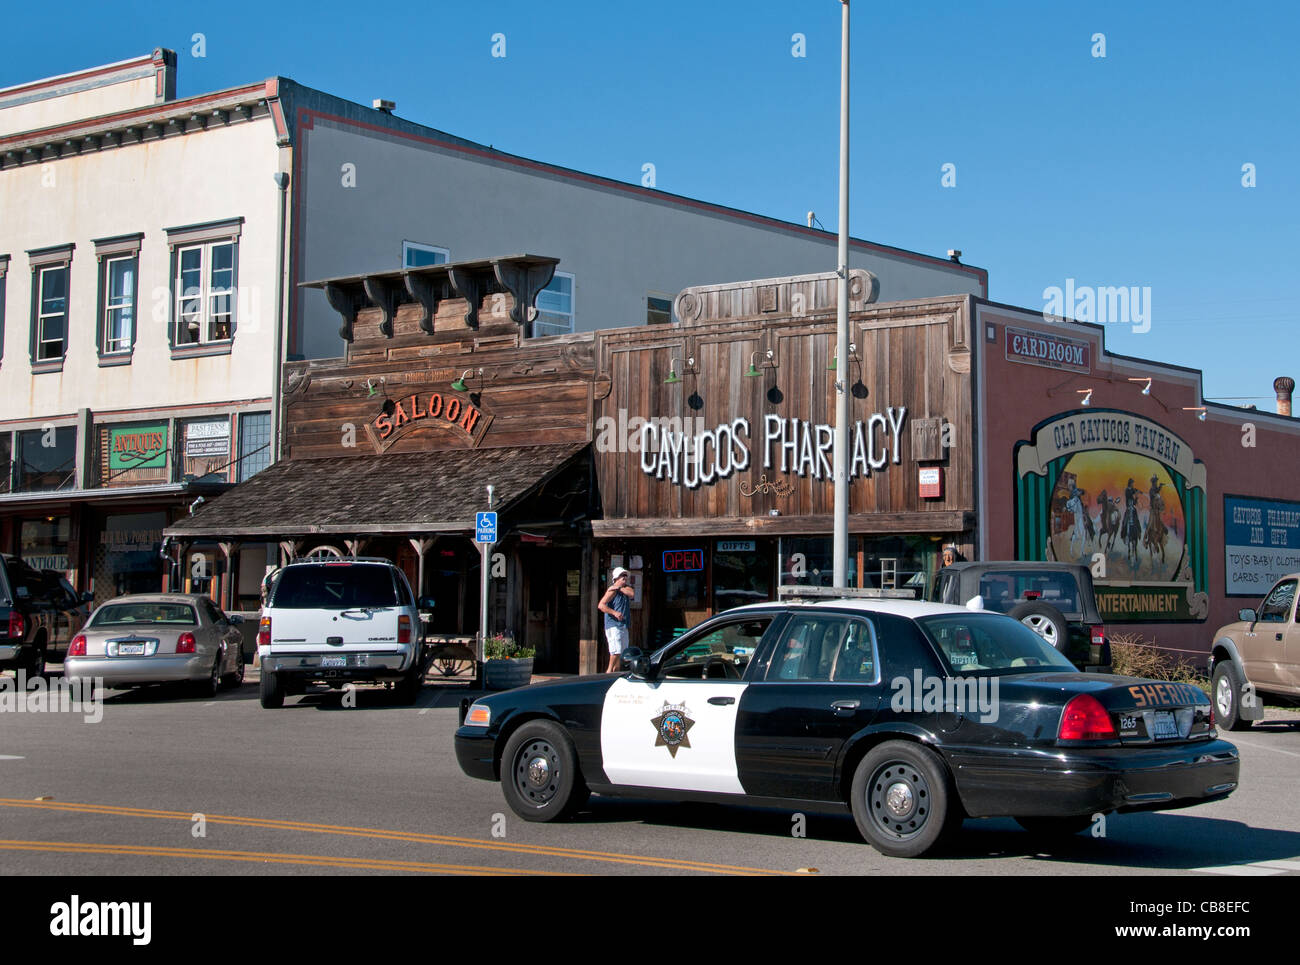 Police Sheriff Cayucos California United States of America American USA Town City Stock Photo